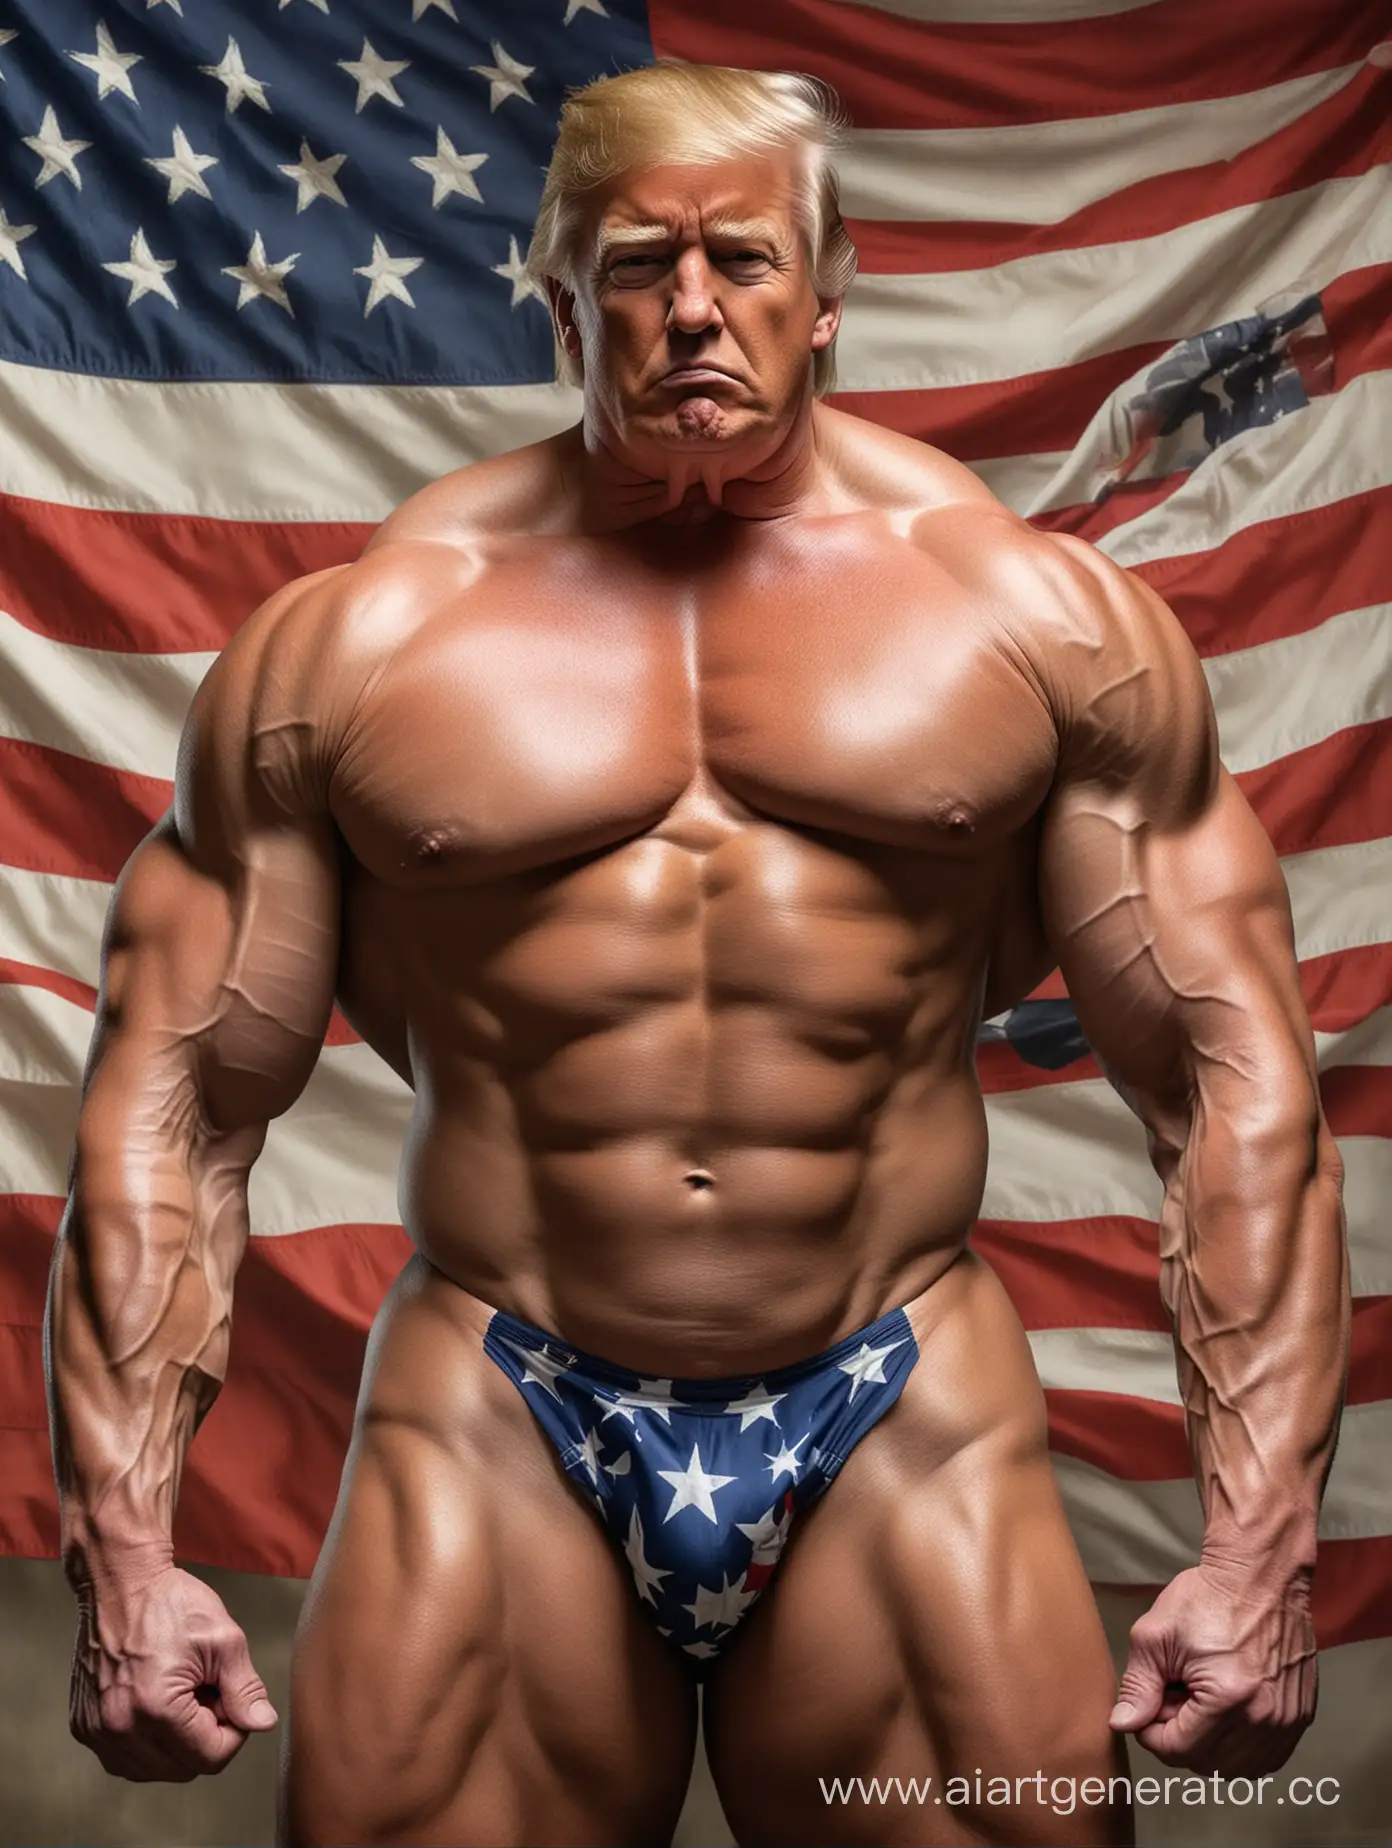 Muscular-Figure-with-Patriotic-Themed-Attire